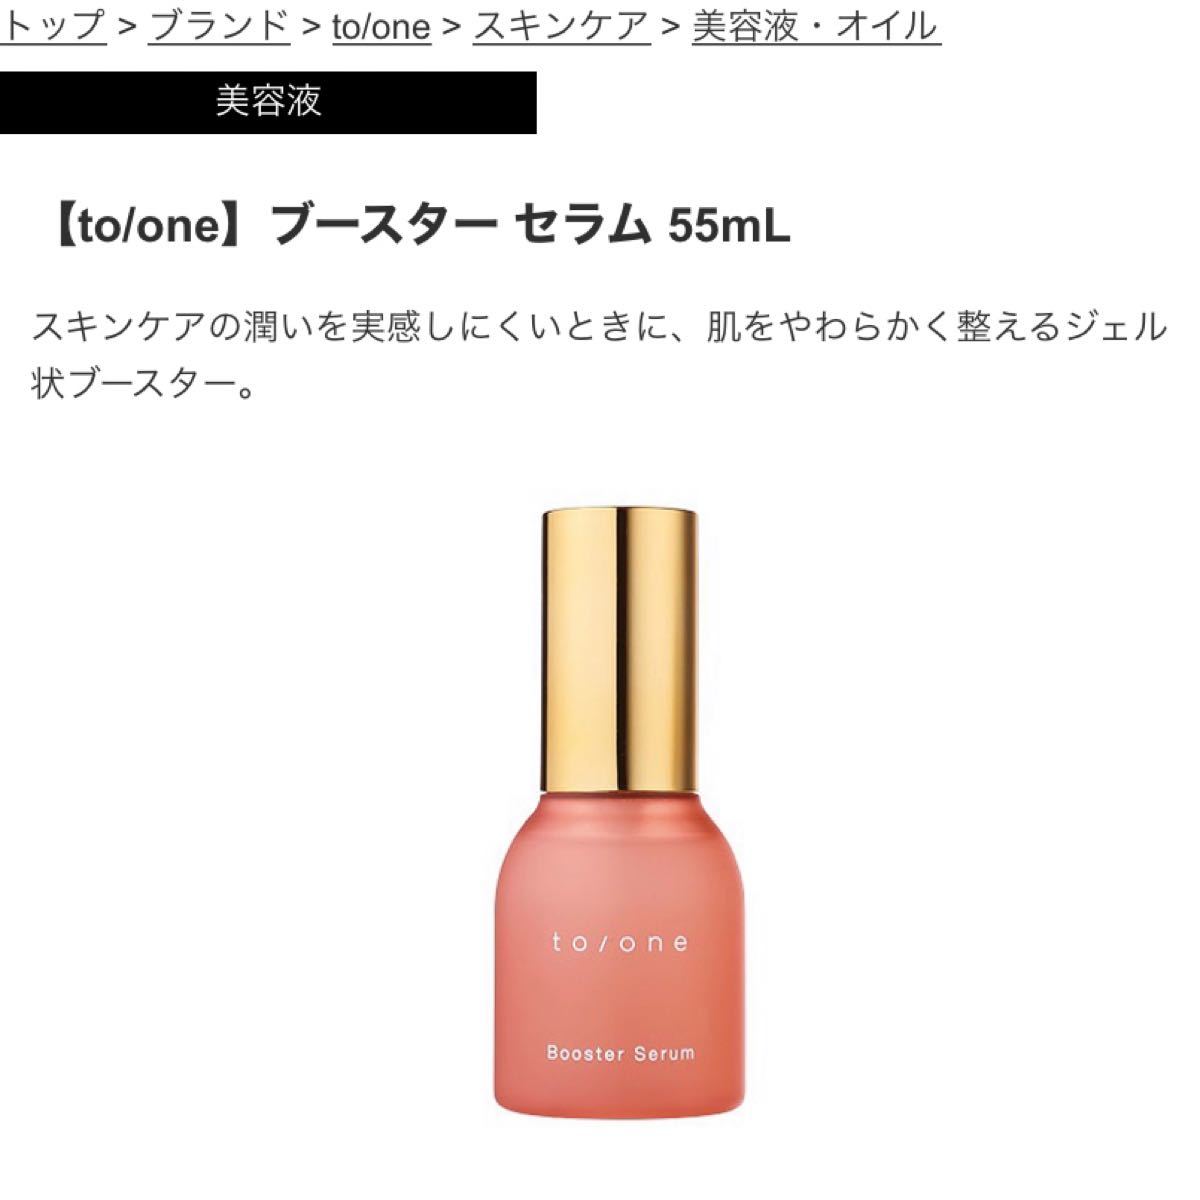 SALE／56%OFF】 to one トーン ブースター セラム M 55ml id-web.fr